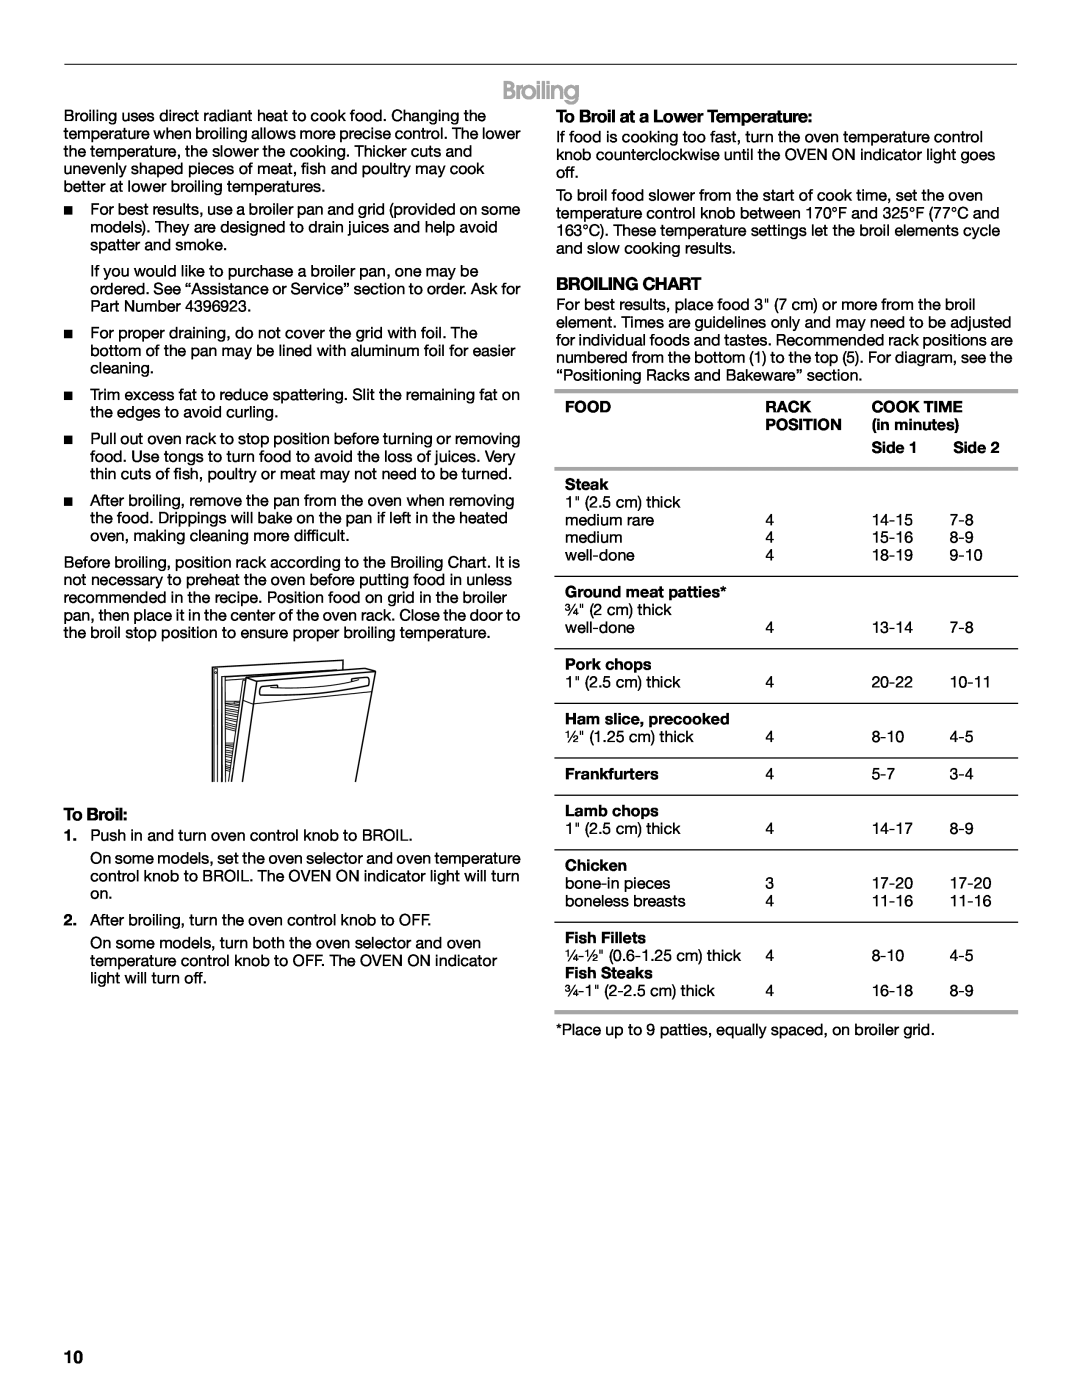 Whirlpool W10017710 manual To Broil at a Lower Temperature, Broiling Chart 